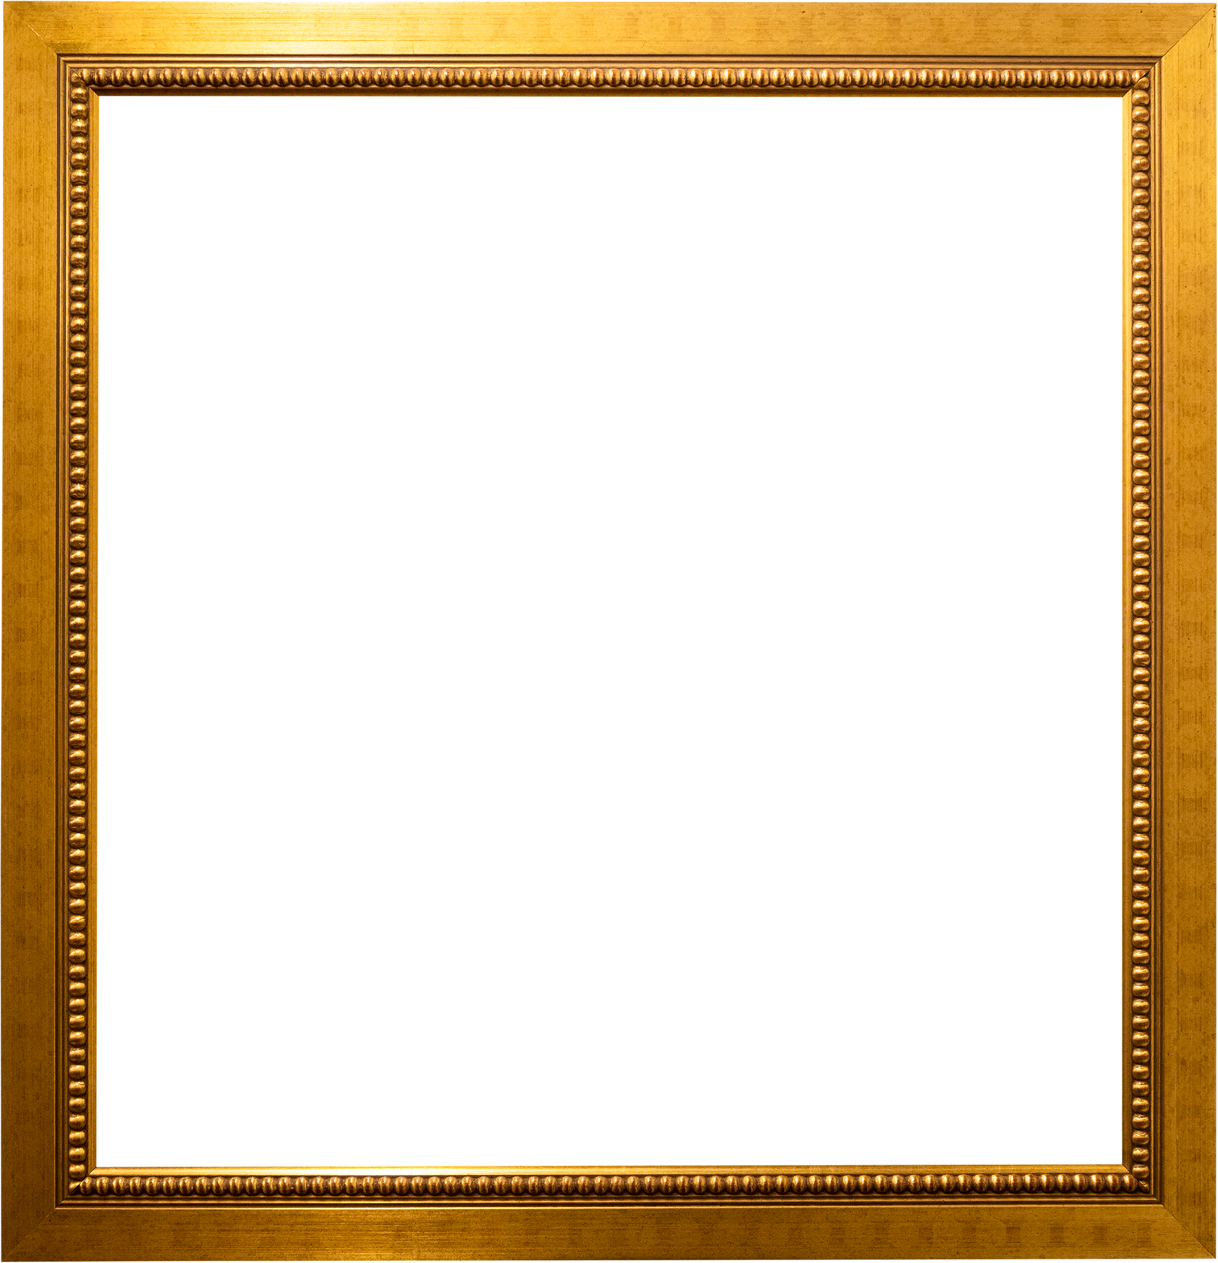 blank square flat golden picture frame cutout